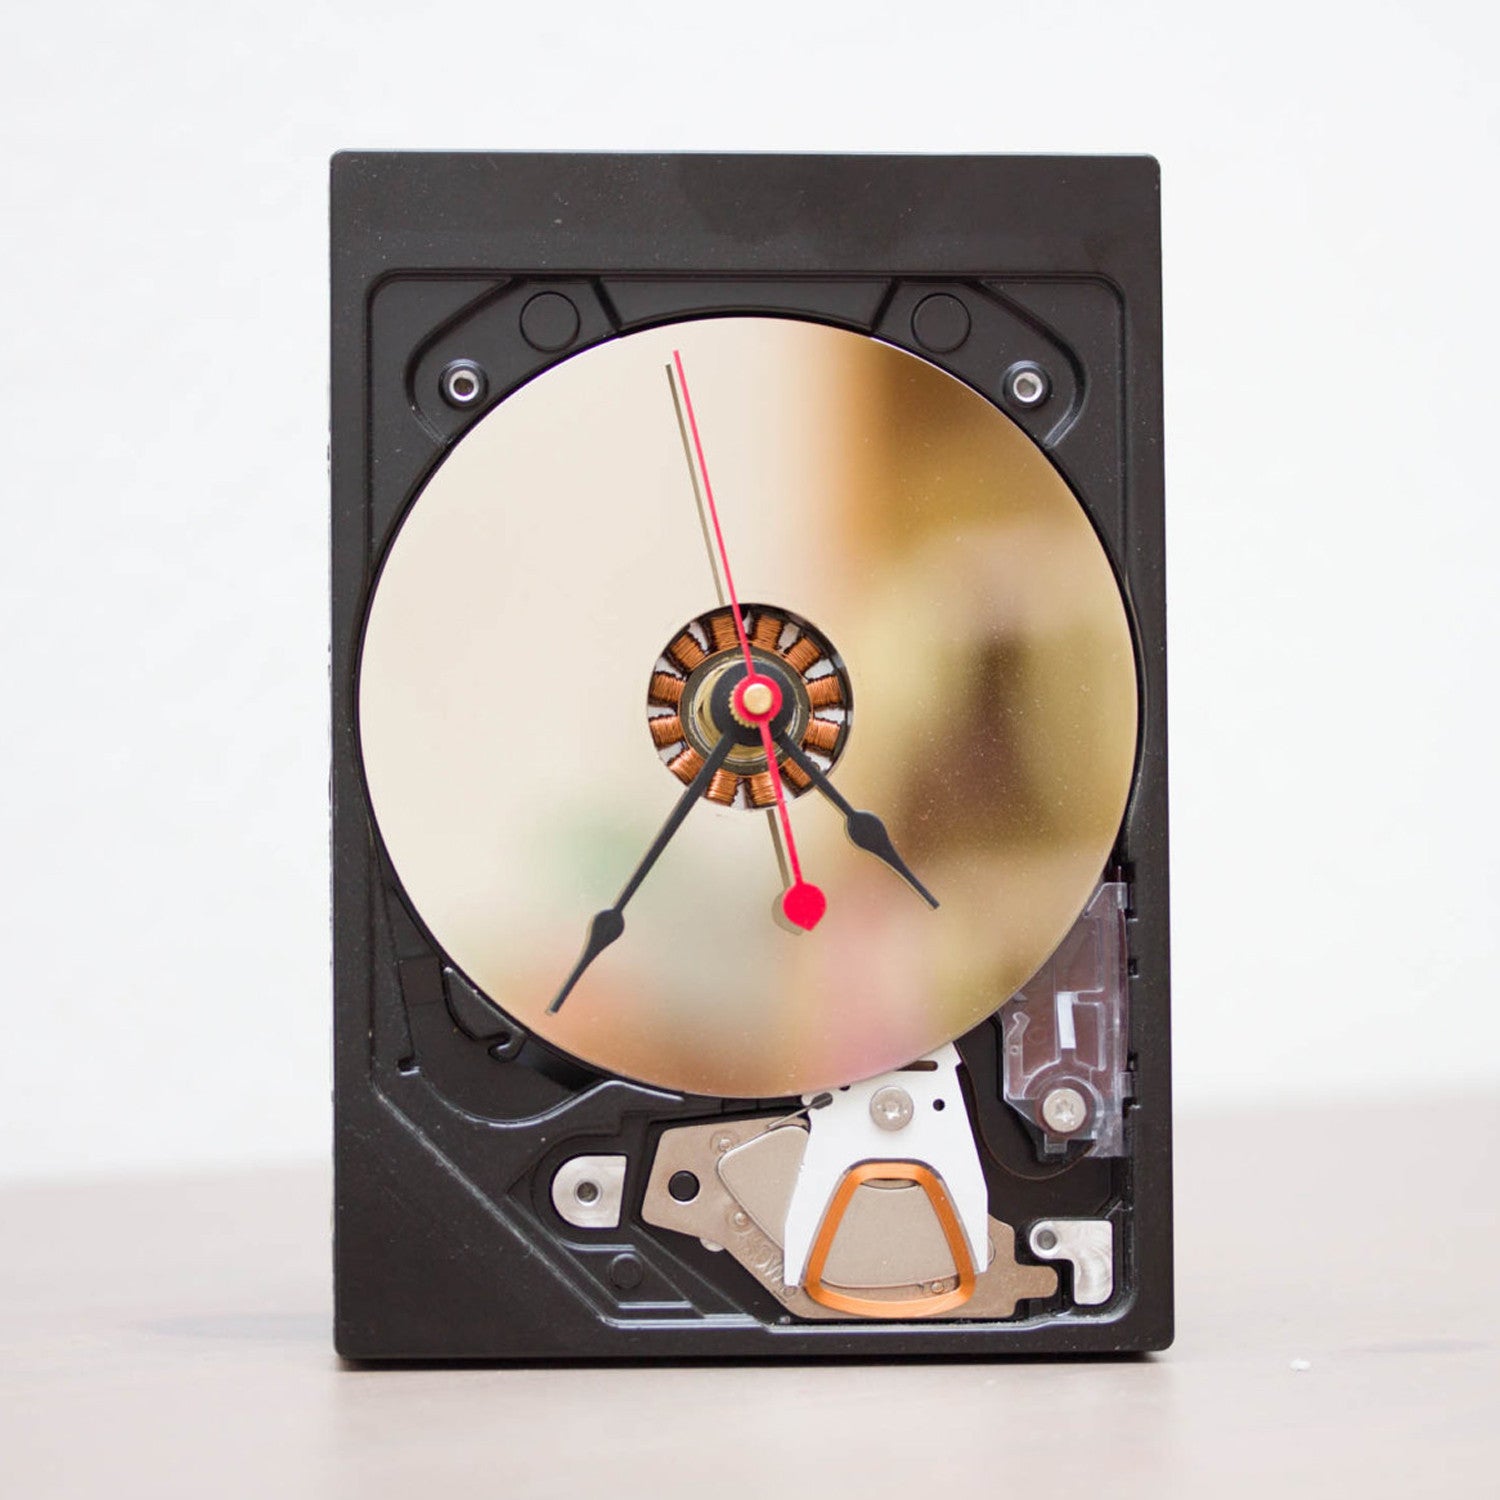 Desk clock made of a recycled HDD